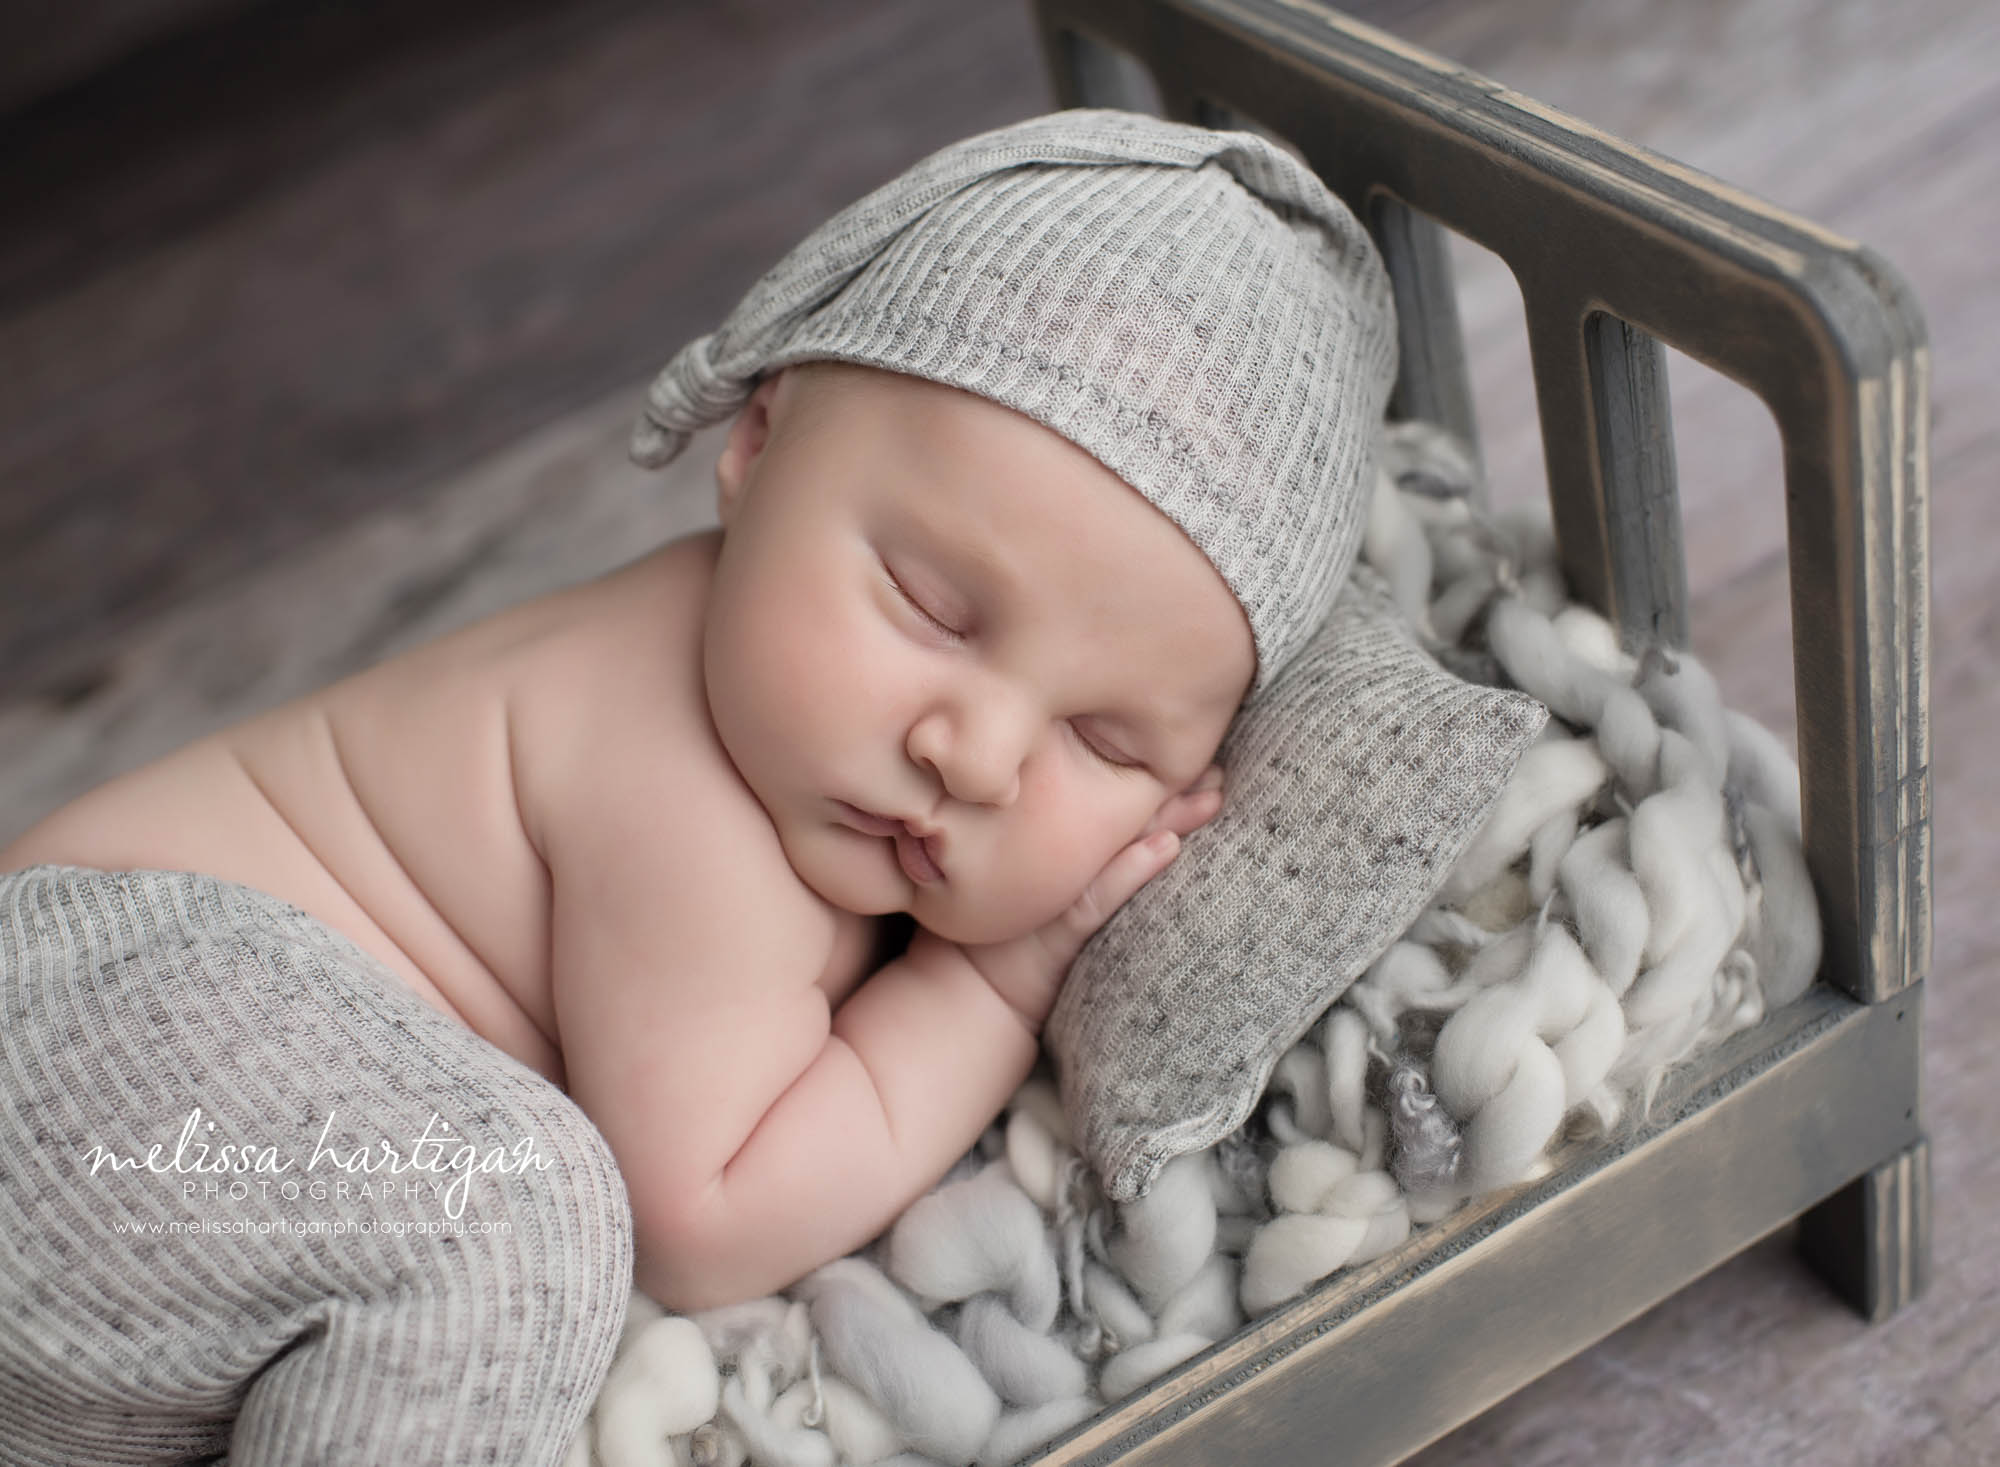 baby boy posed on wooden prop bed with gray pants hat and newborn pillow sleeping